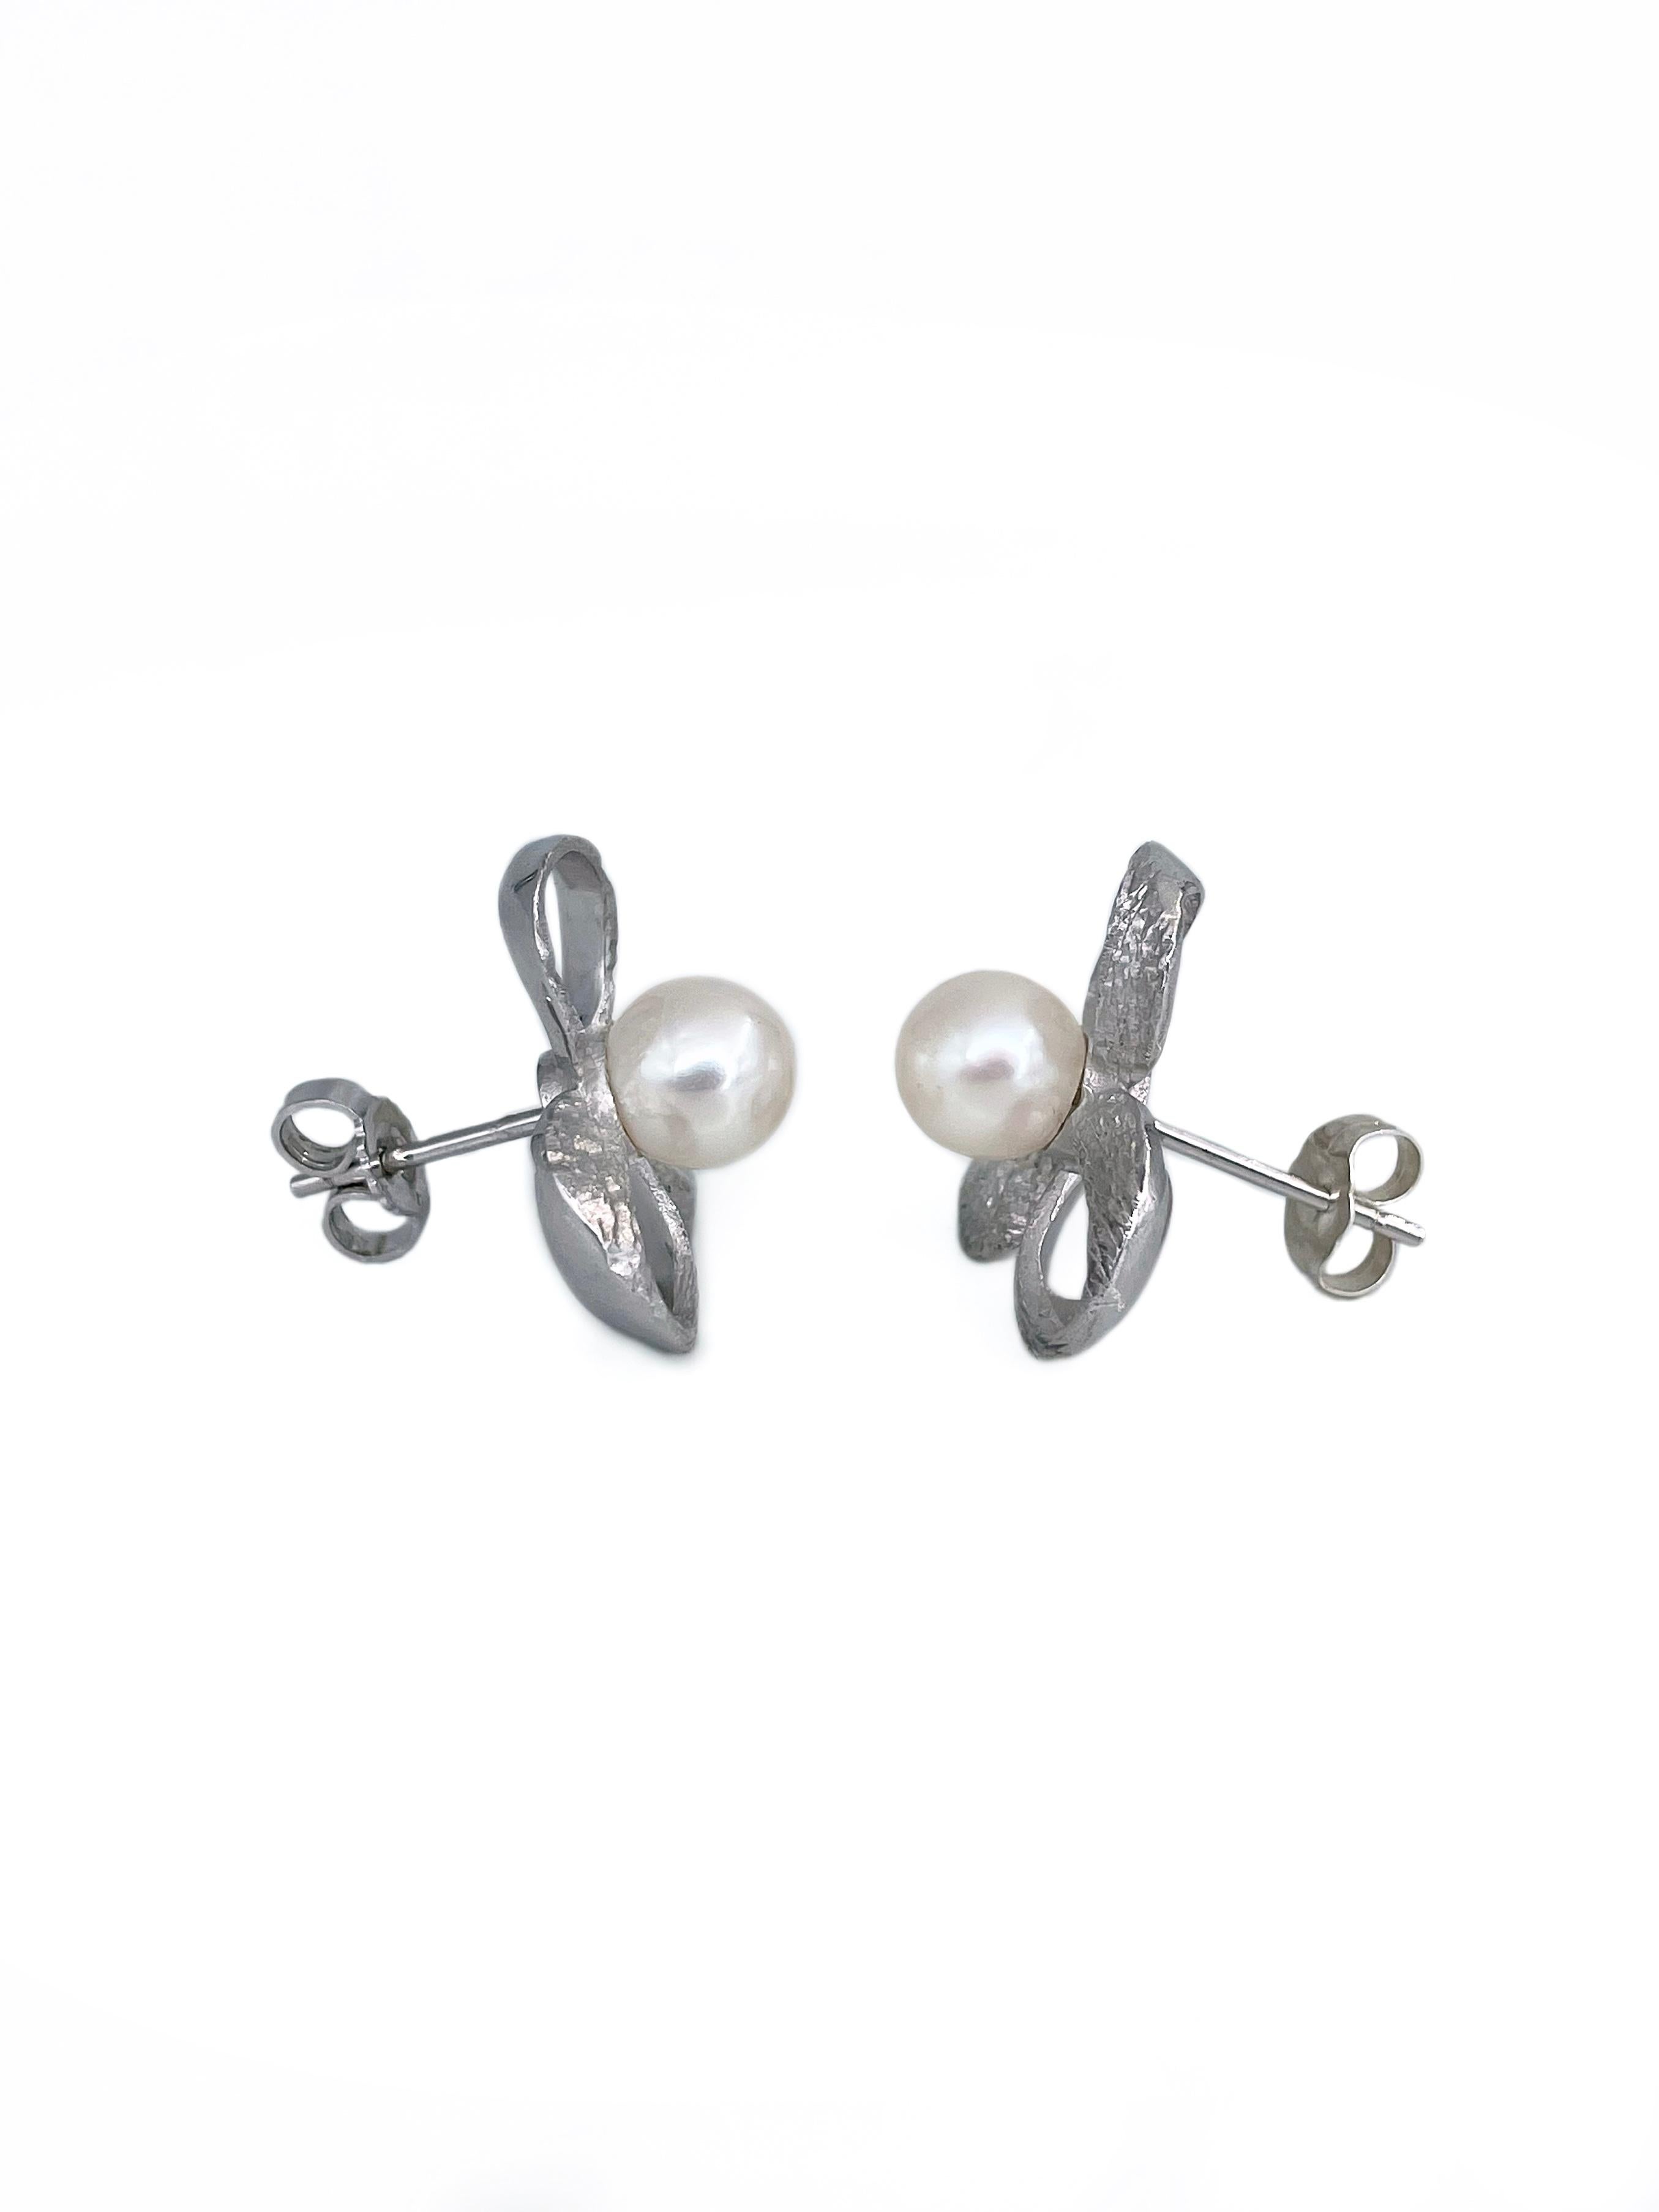 Round Cut Modern 18 Karat White Gold Floral Design Pearl Stud Earrings For Sale